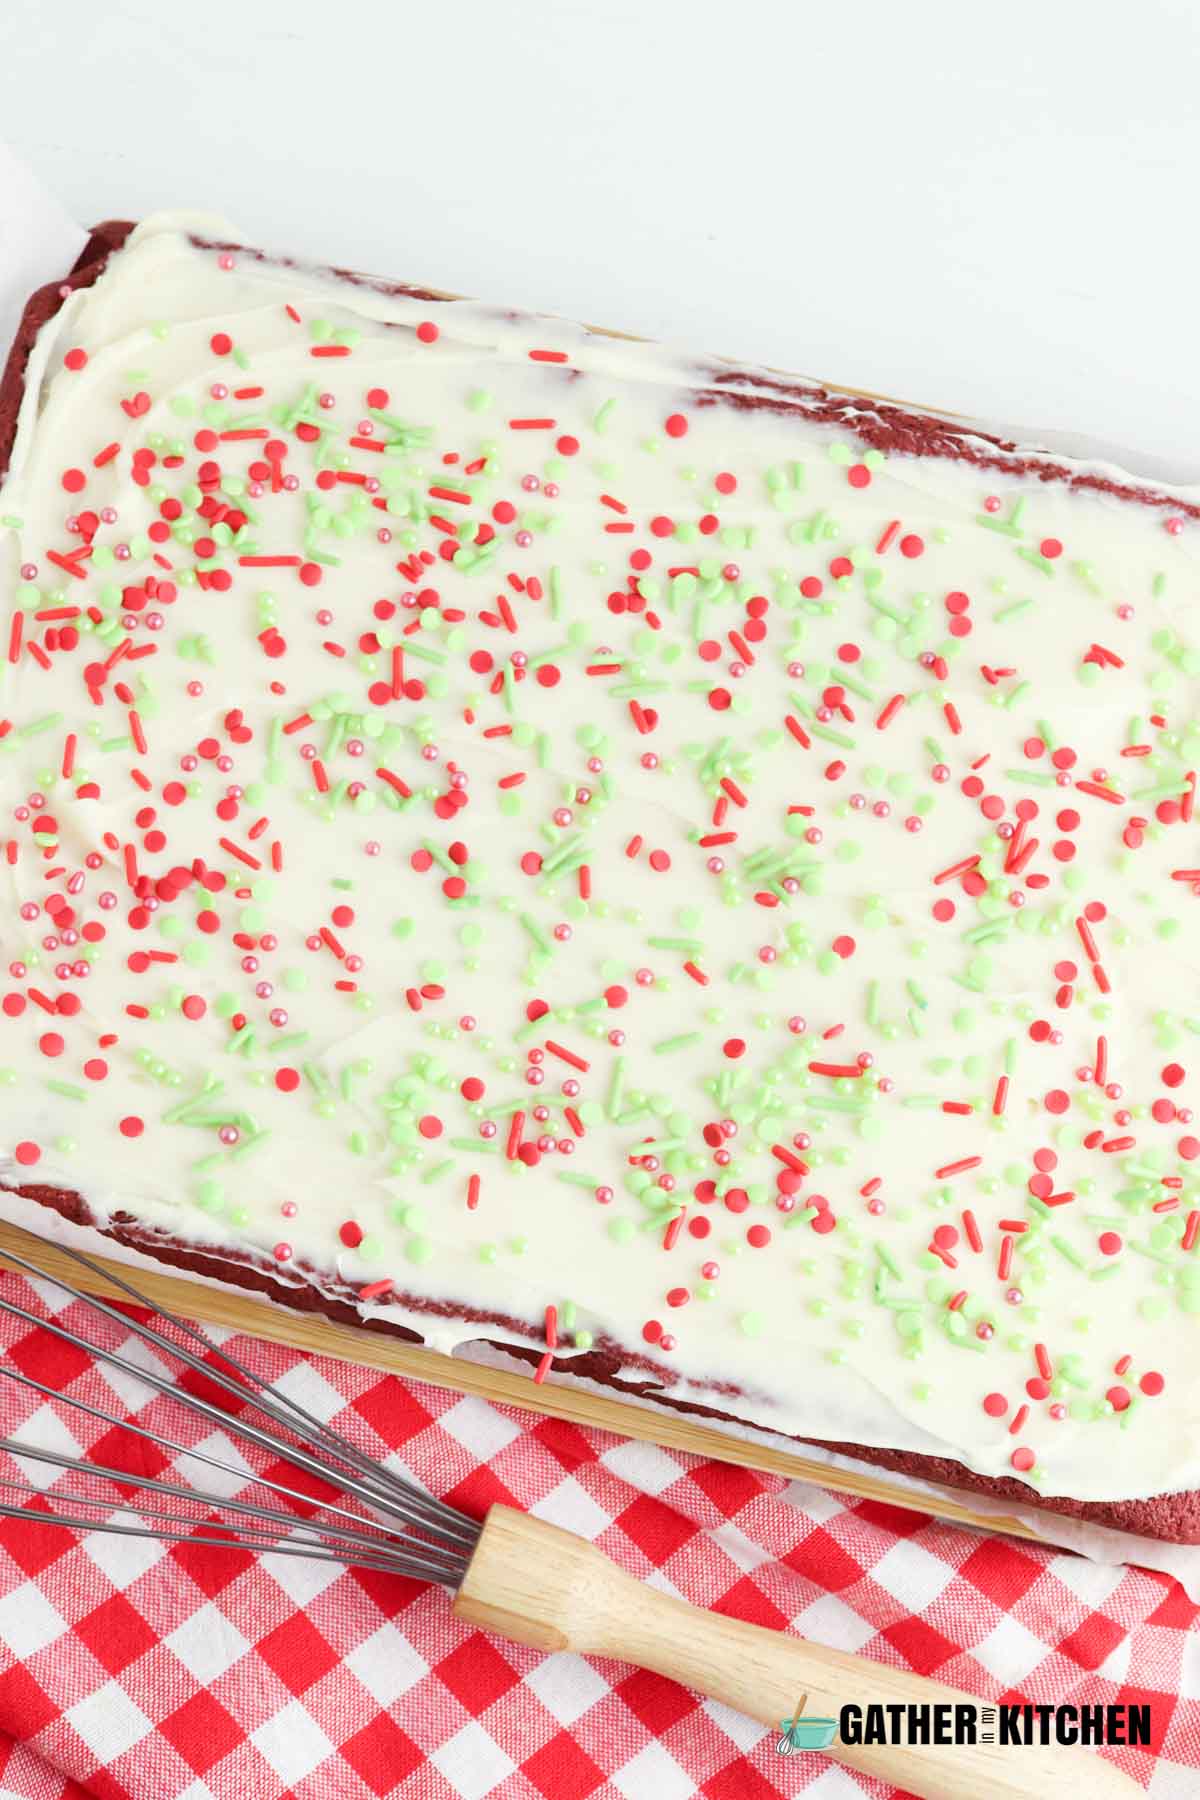 Cookie bars with frosting and sprinkles added.